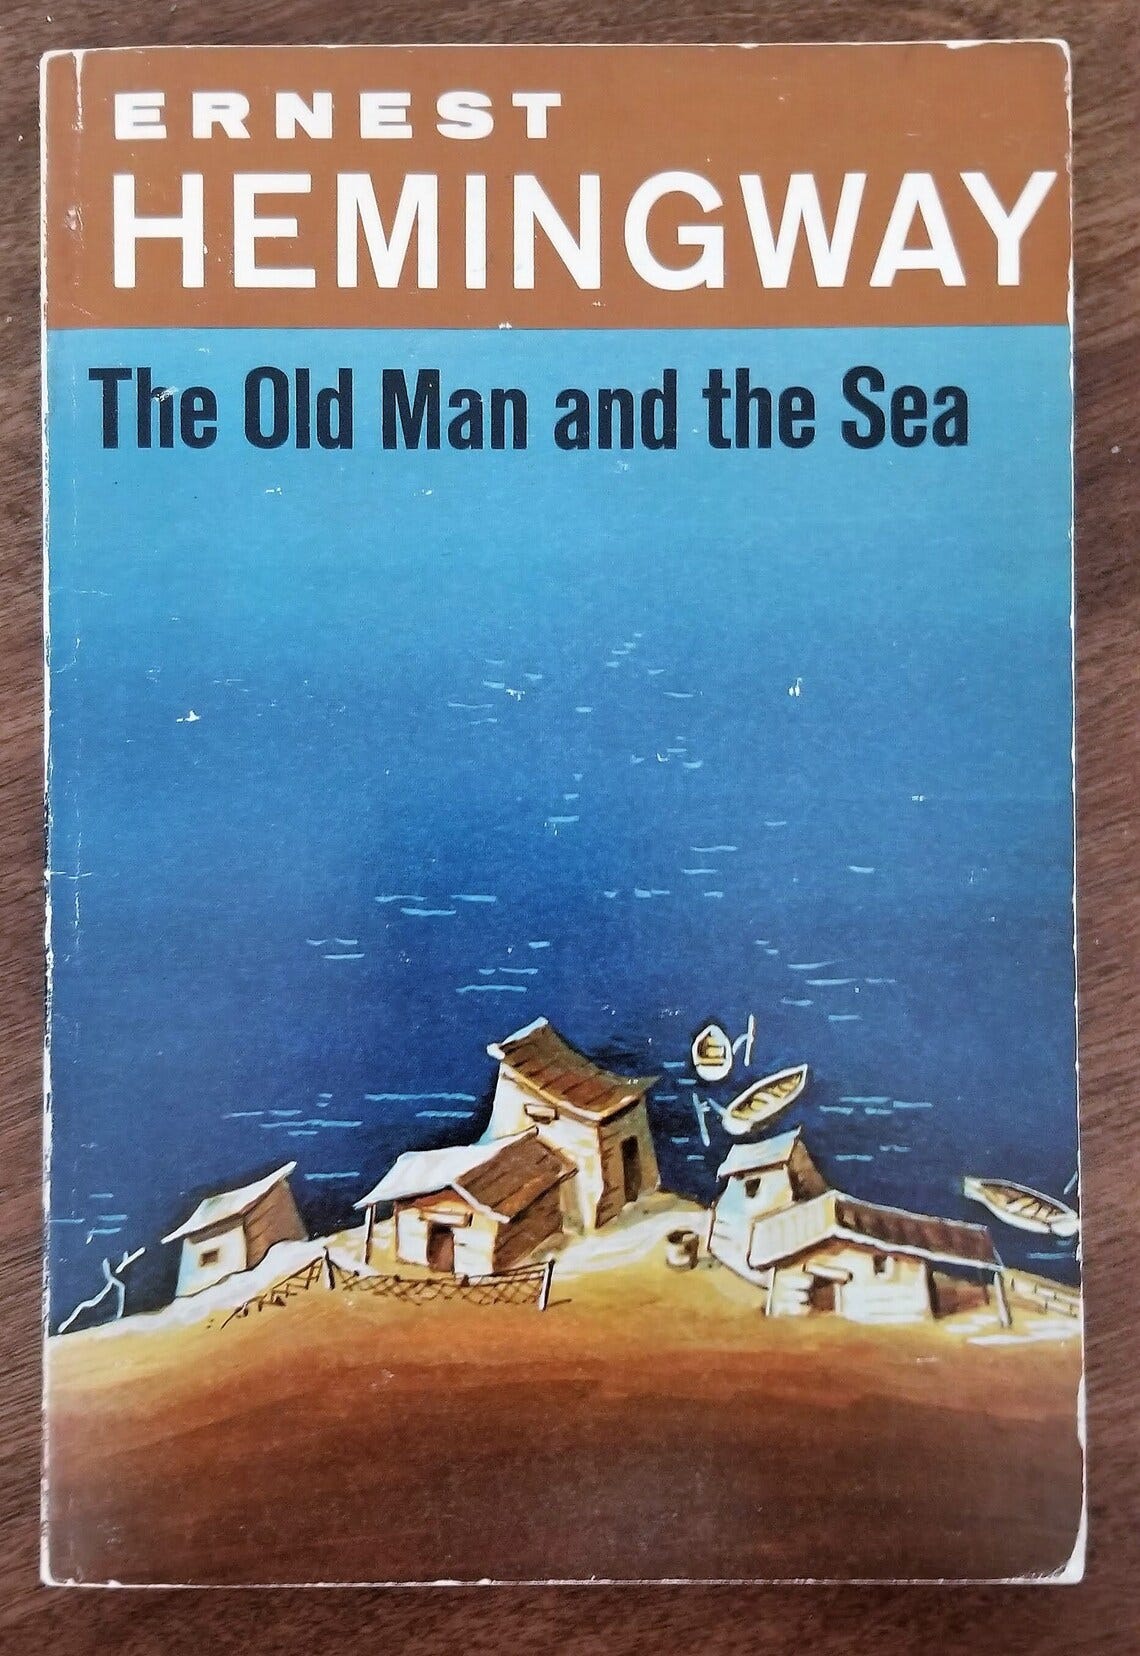 The Old Man and the Sea by Ernest Hemingway image 1